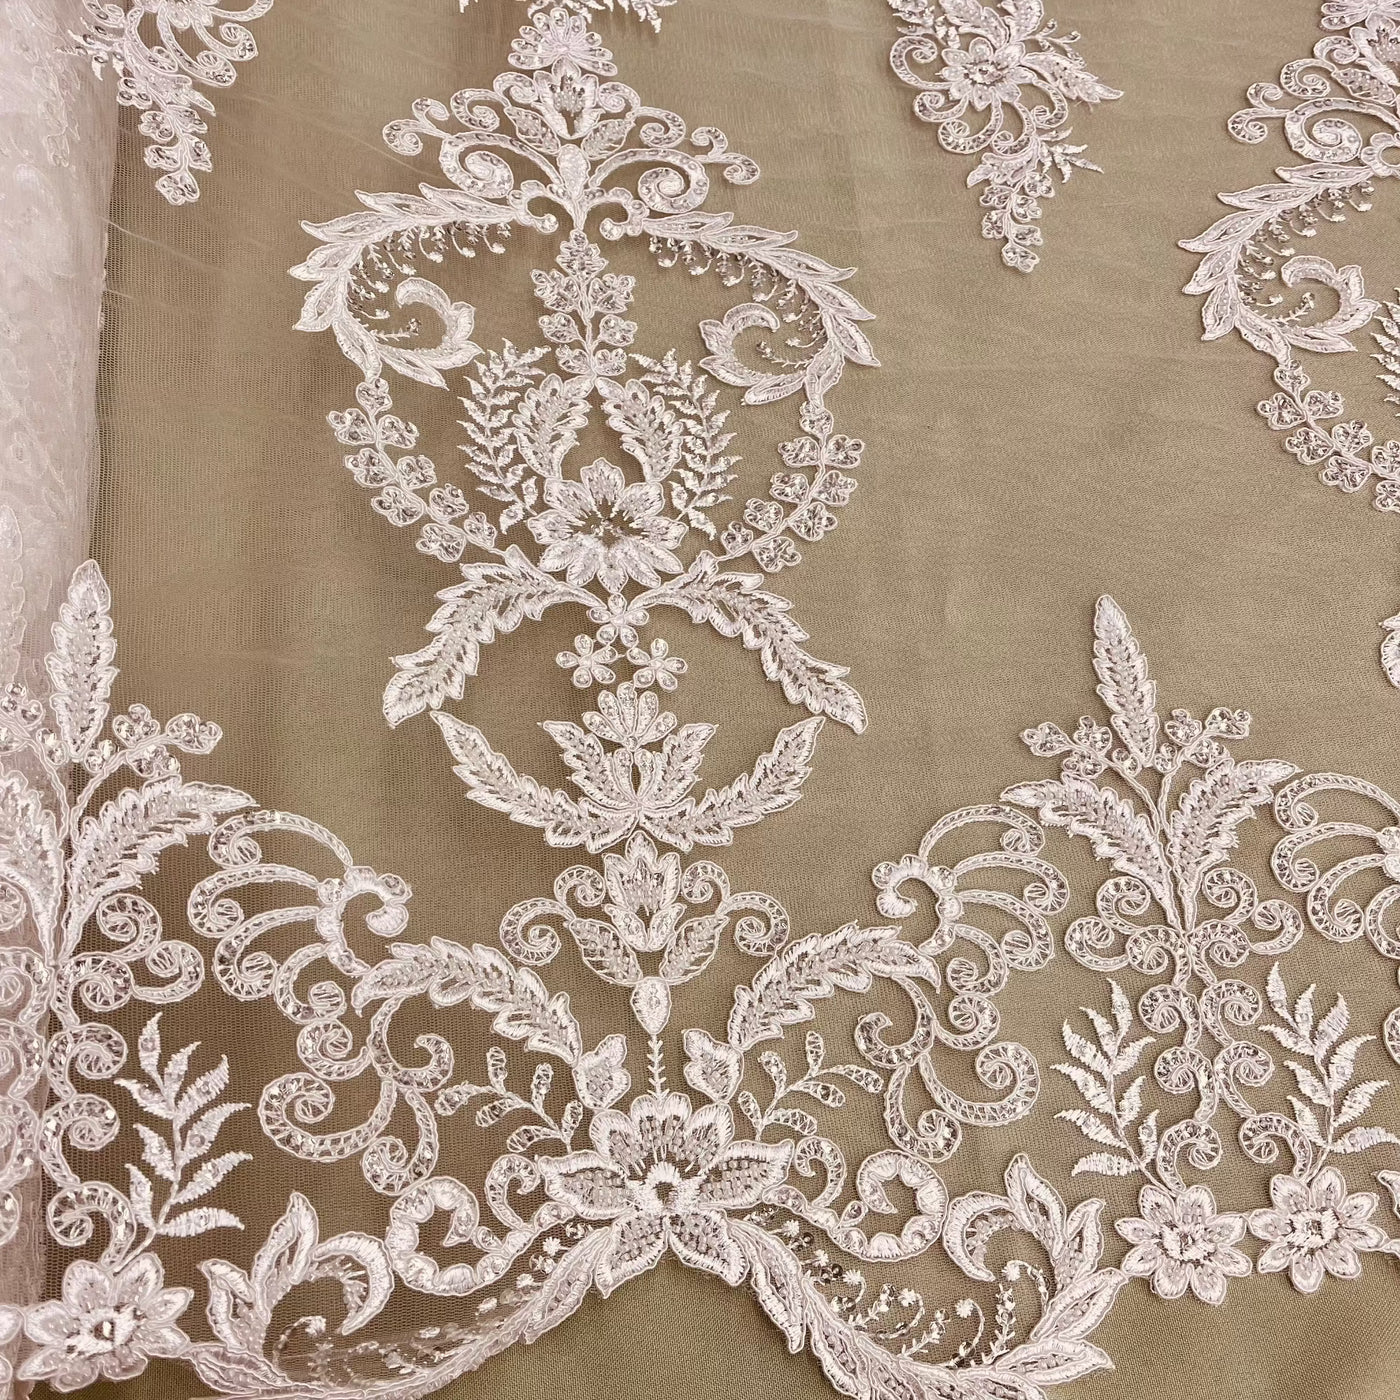 Beaded & Corded Bridal Lace Fabric Embroidered on 100% Polyester Net Mesh | Lace USA - GD-55518-Ivory